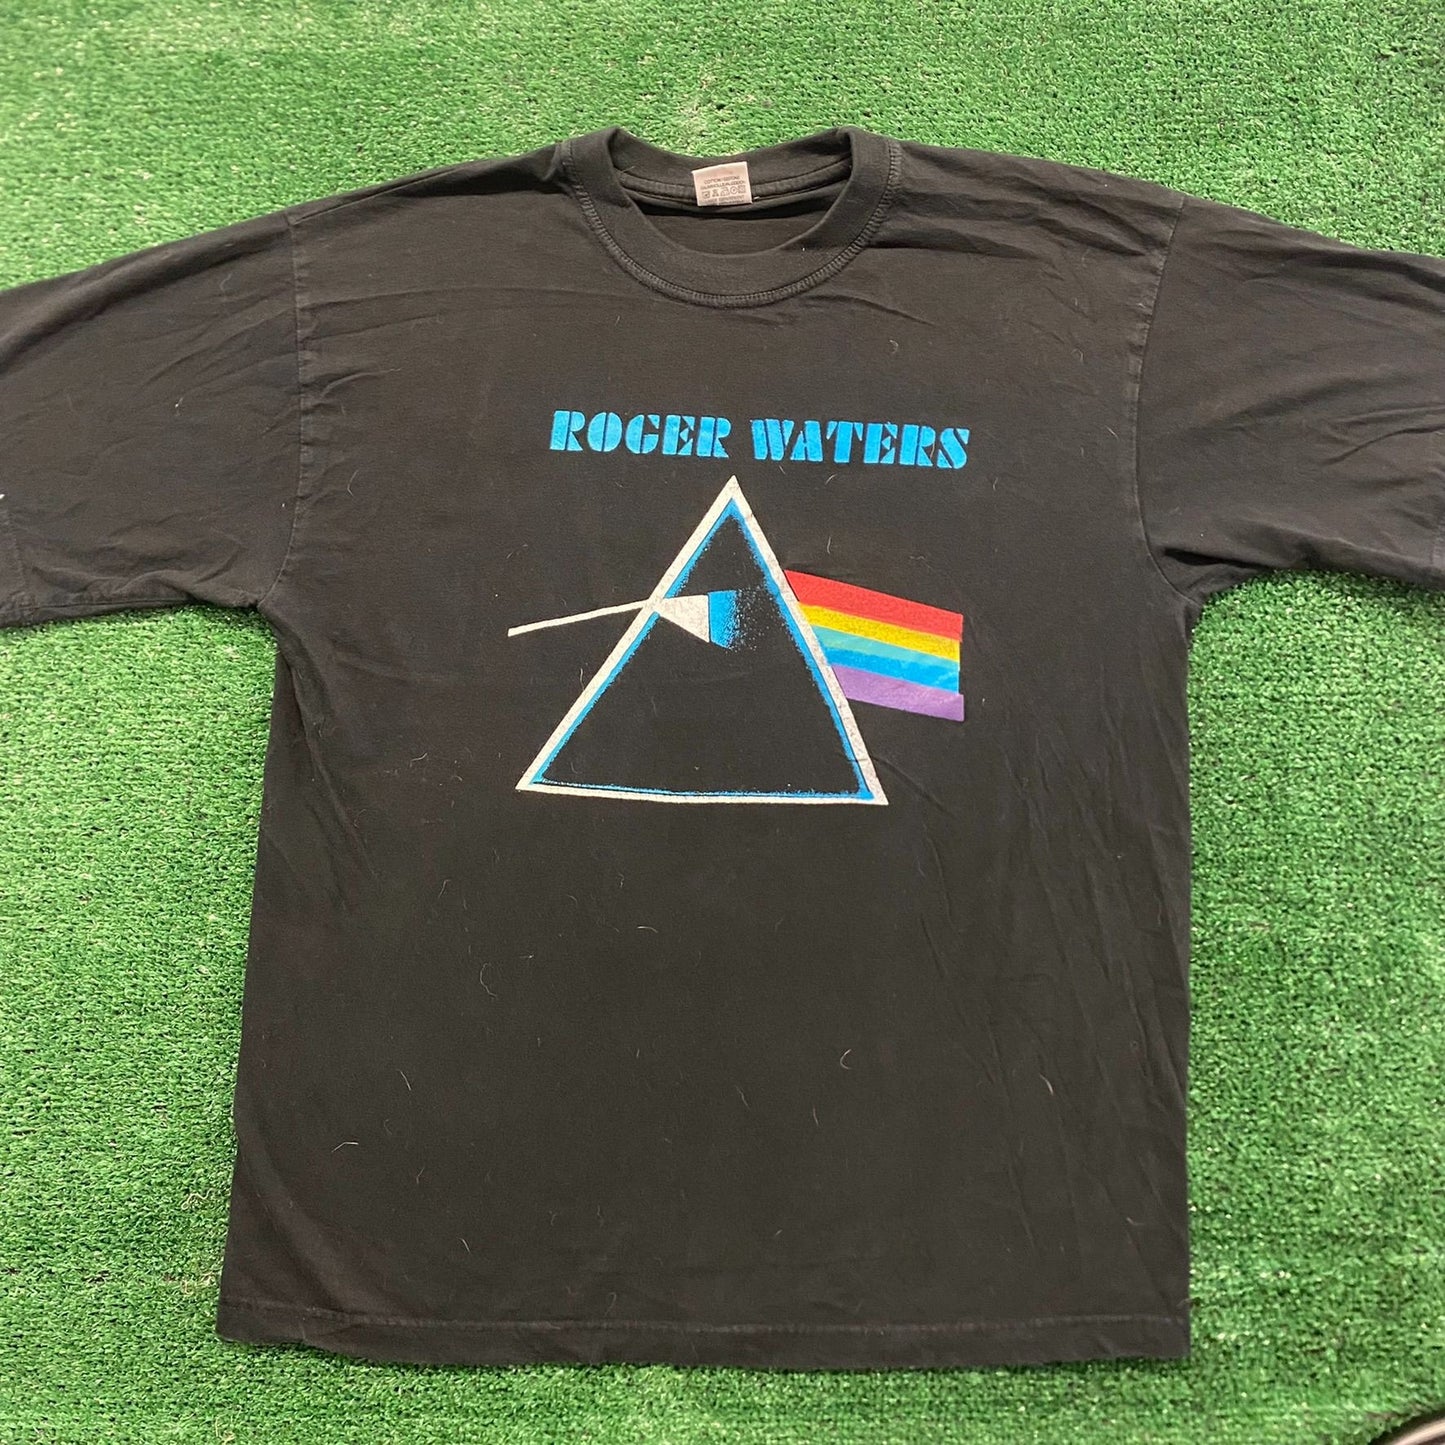 Roger Waters Pink Floyd Vintage Rock Band T-Shirt